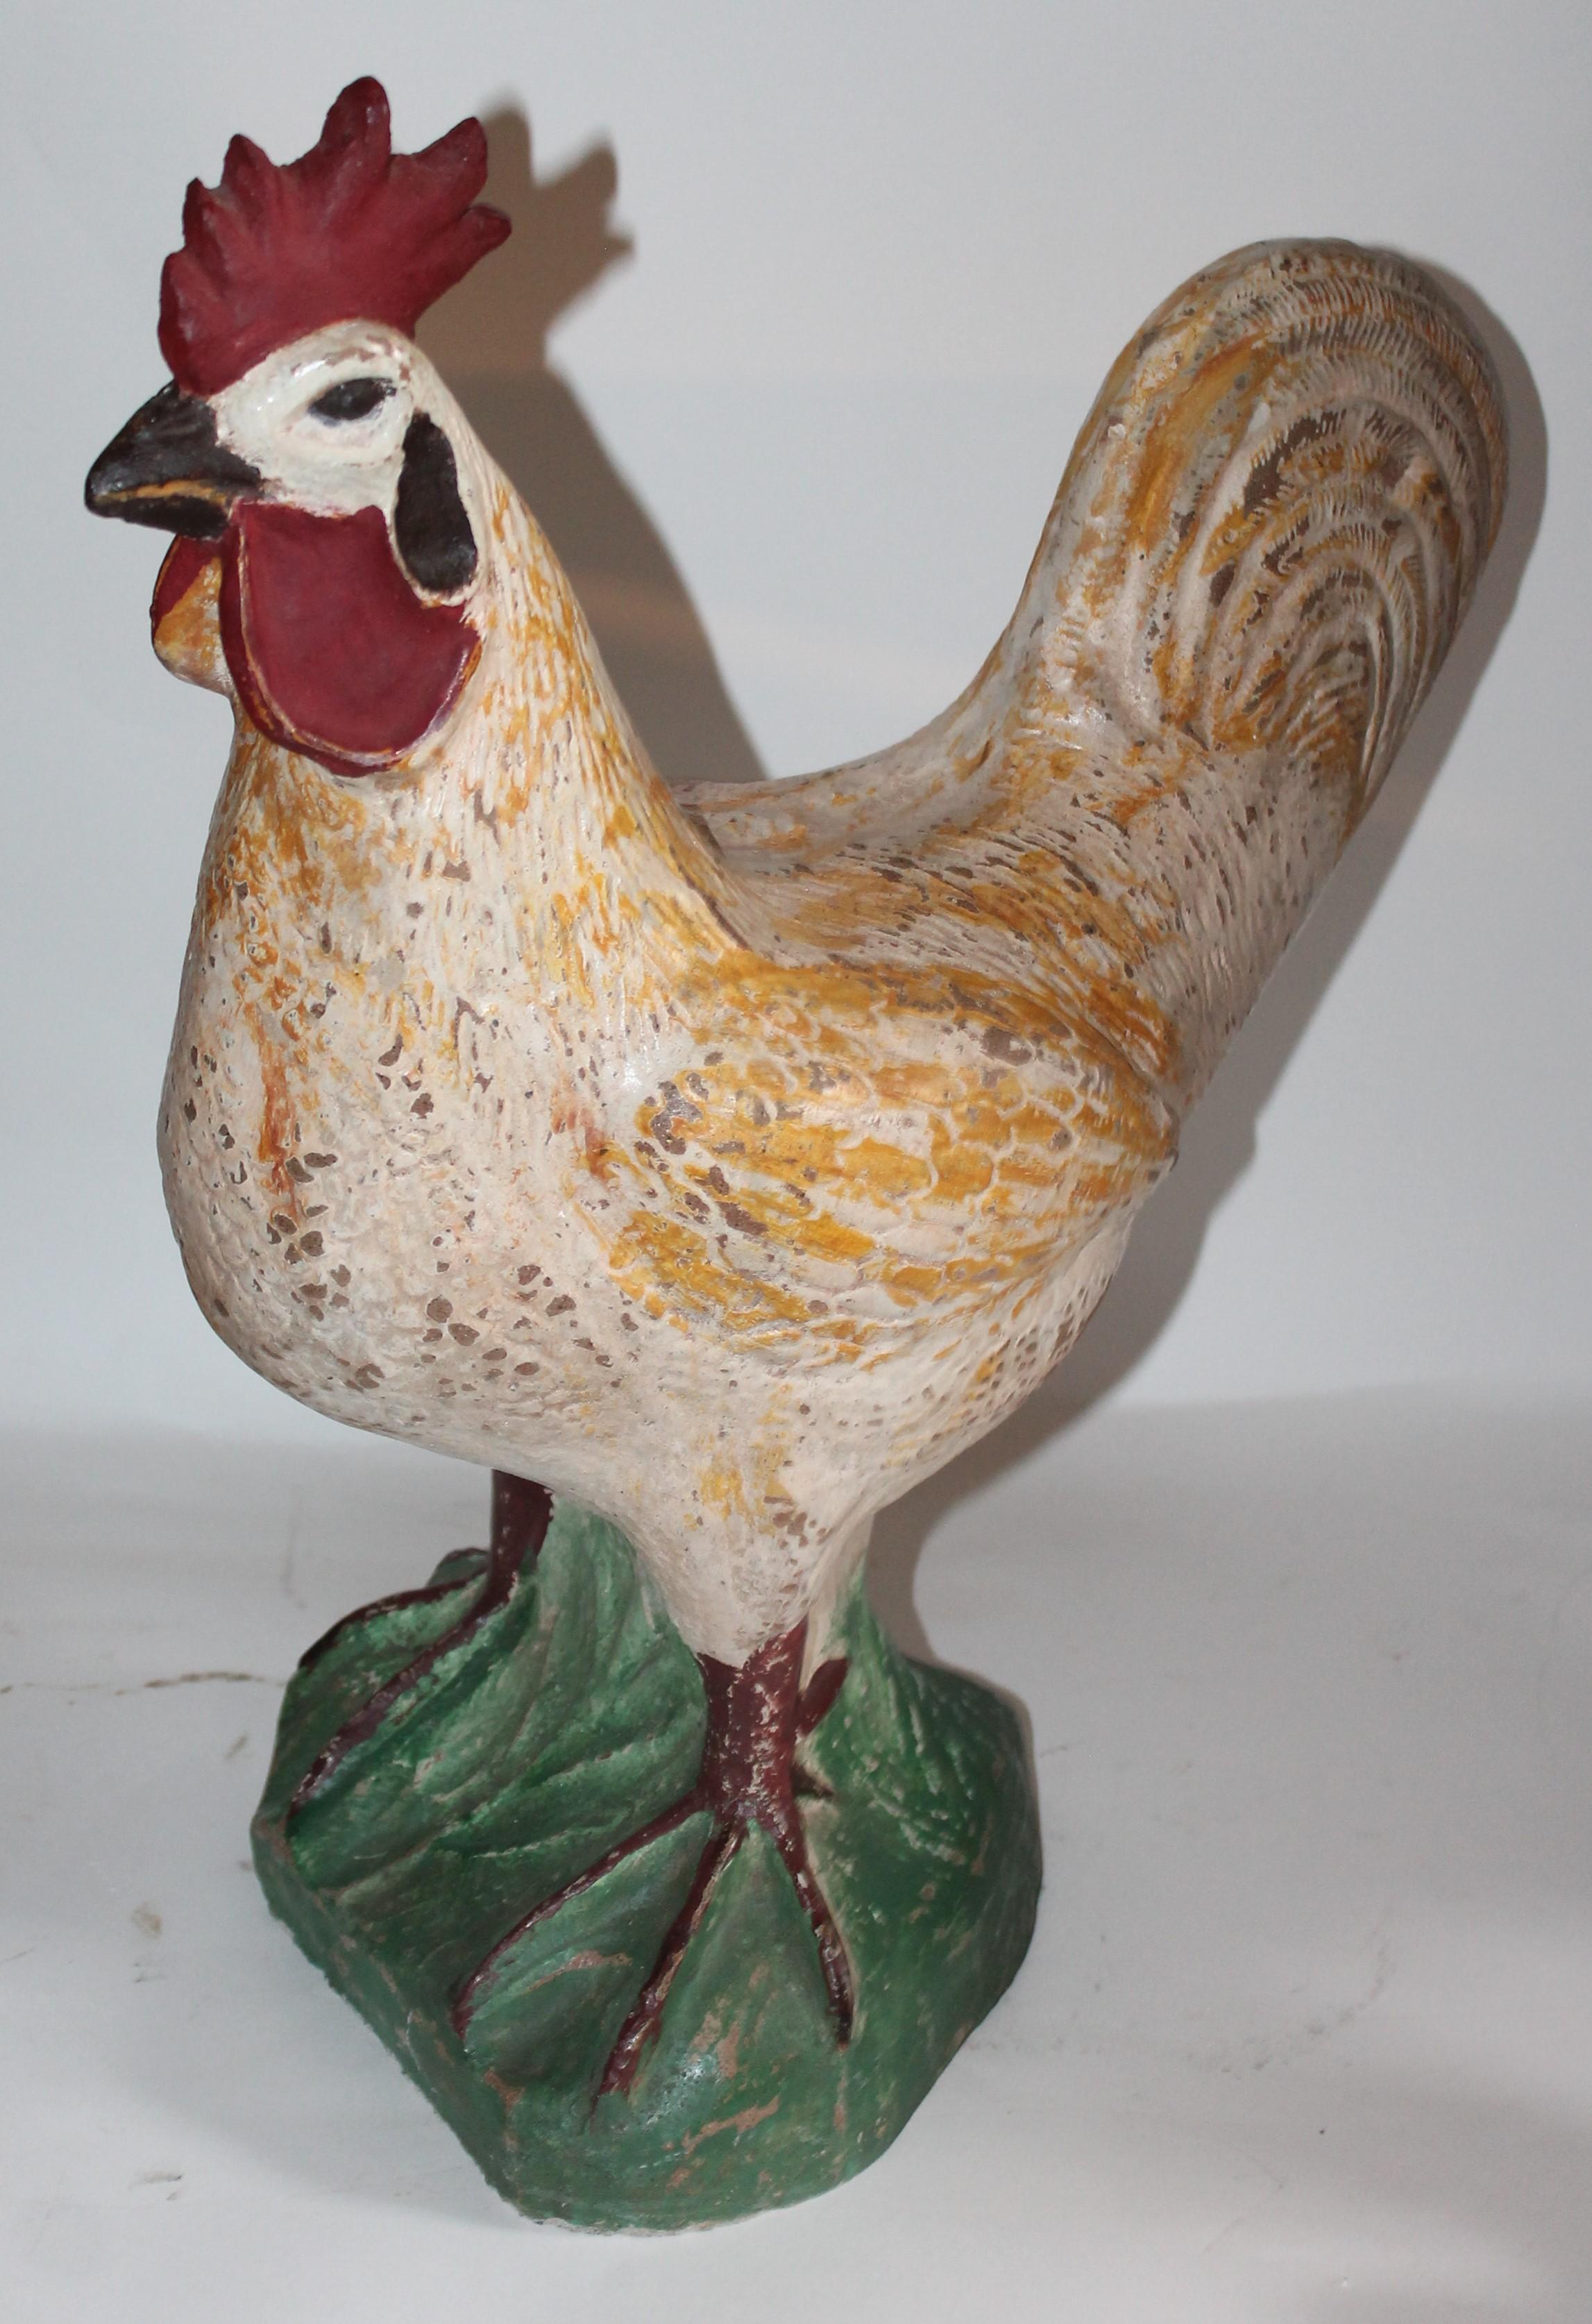 This painted concrete rooster is in great condition as found with colorful painted surface. Was found on a farm in the mid-west.